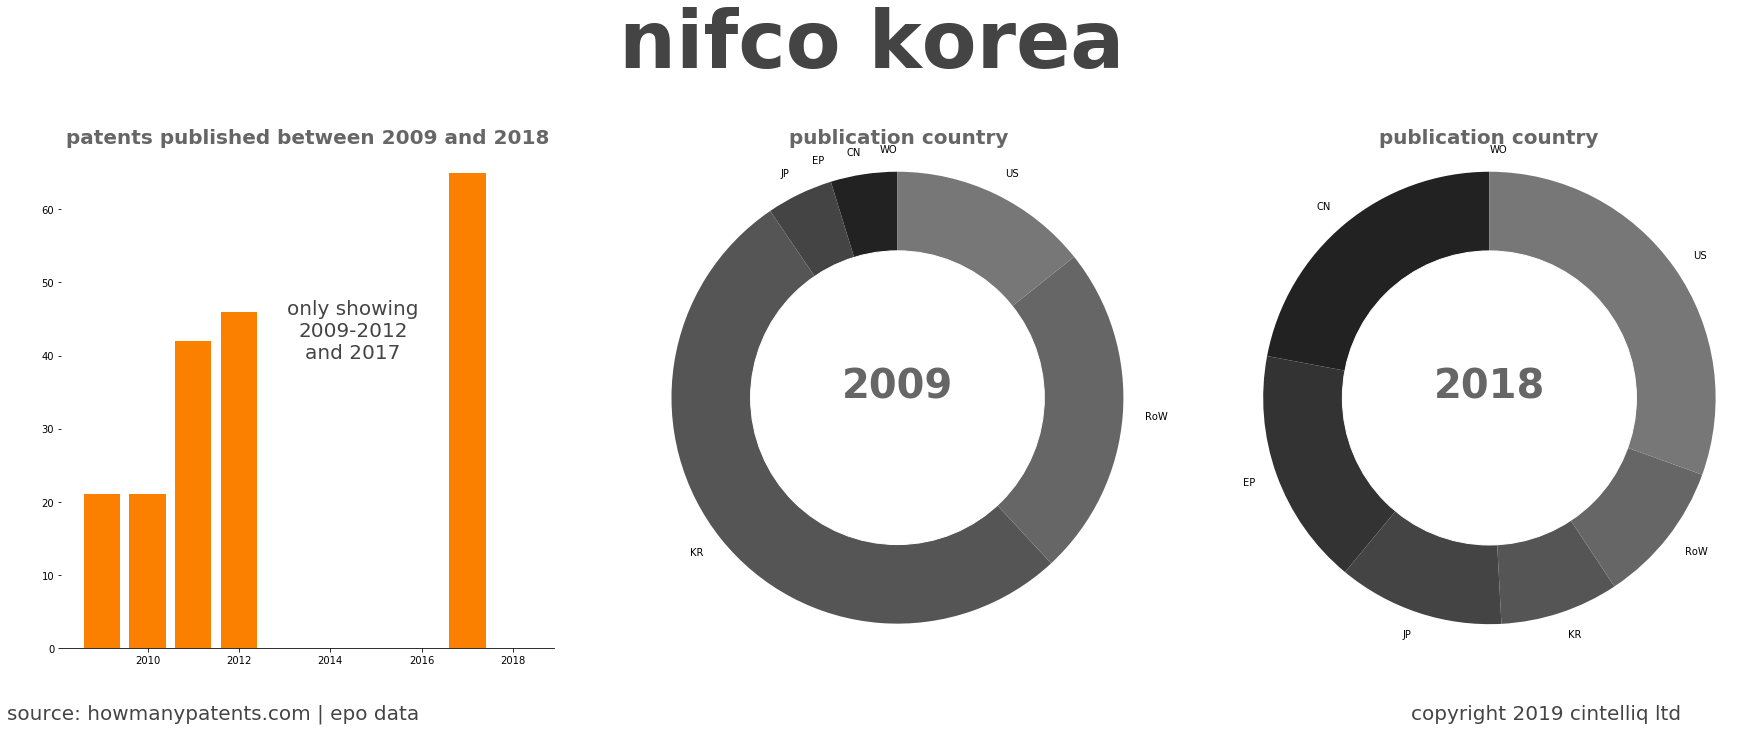 summary of patents for Nifco Korea